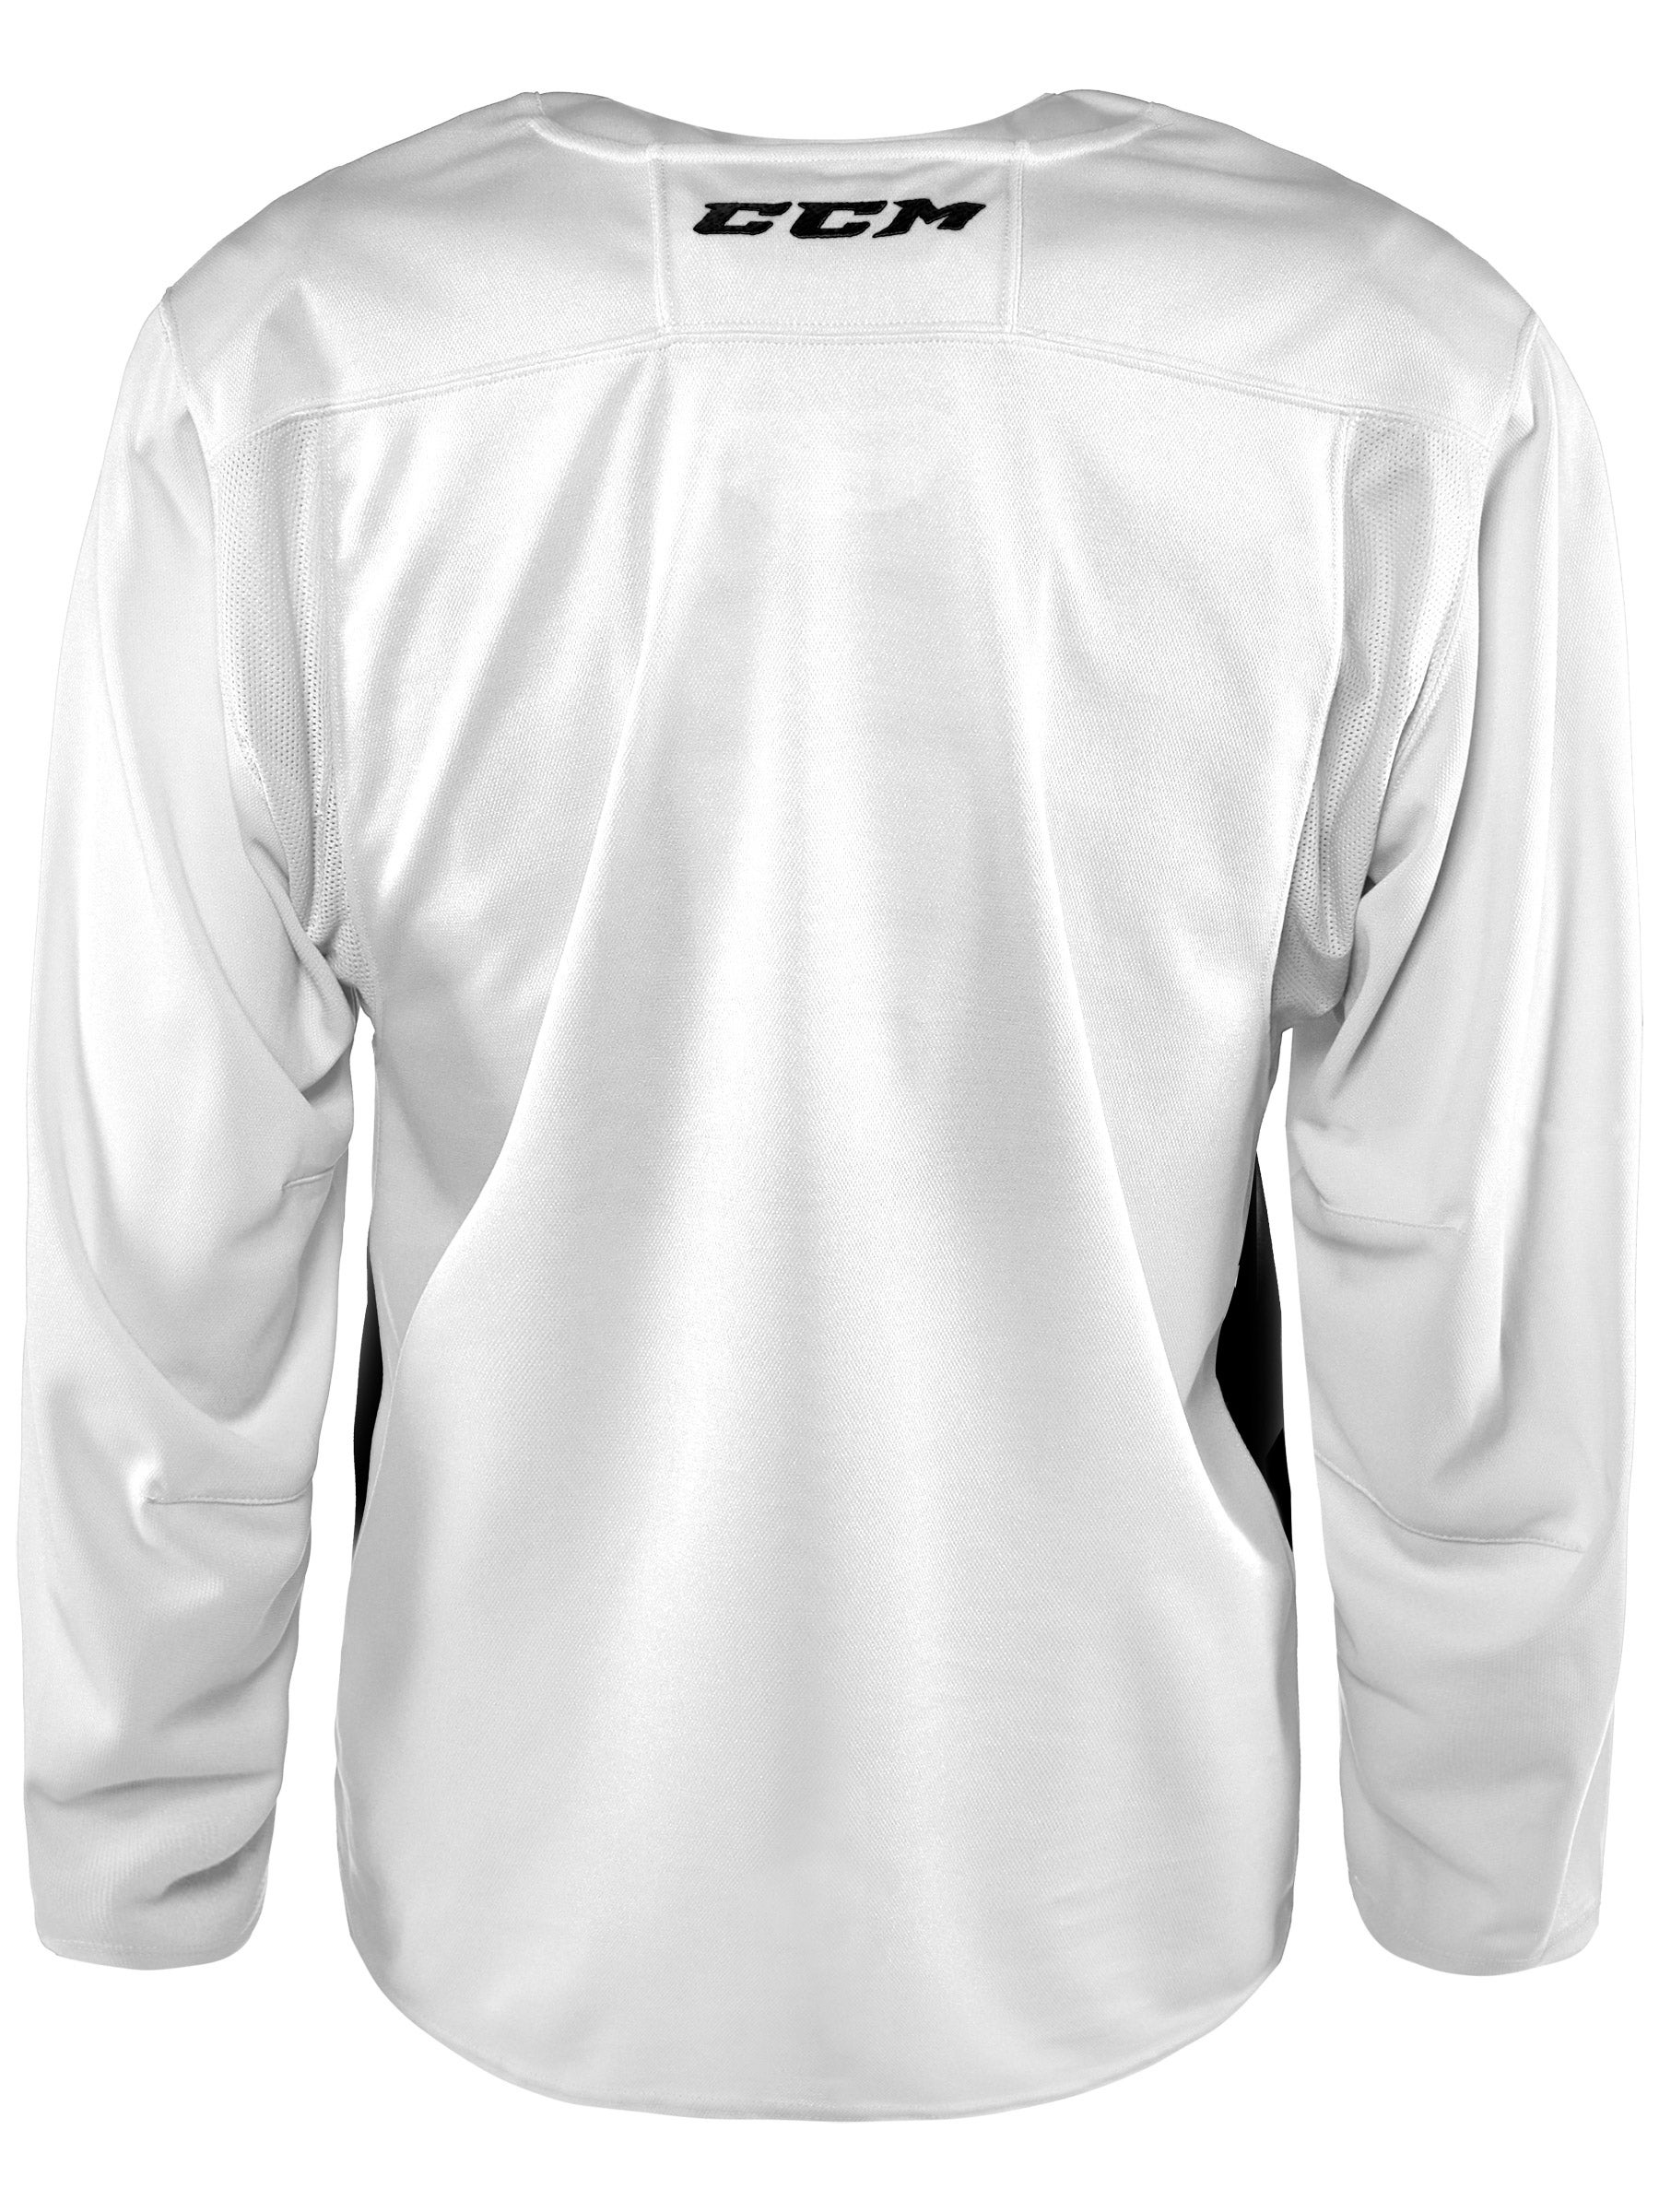 Tron  Dry Fit Practice Hockey Jersey Adult /& JR EDGE INSPIRED